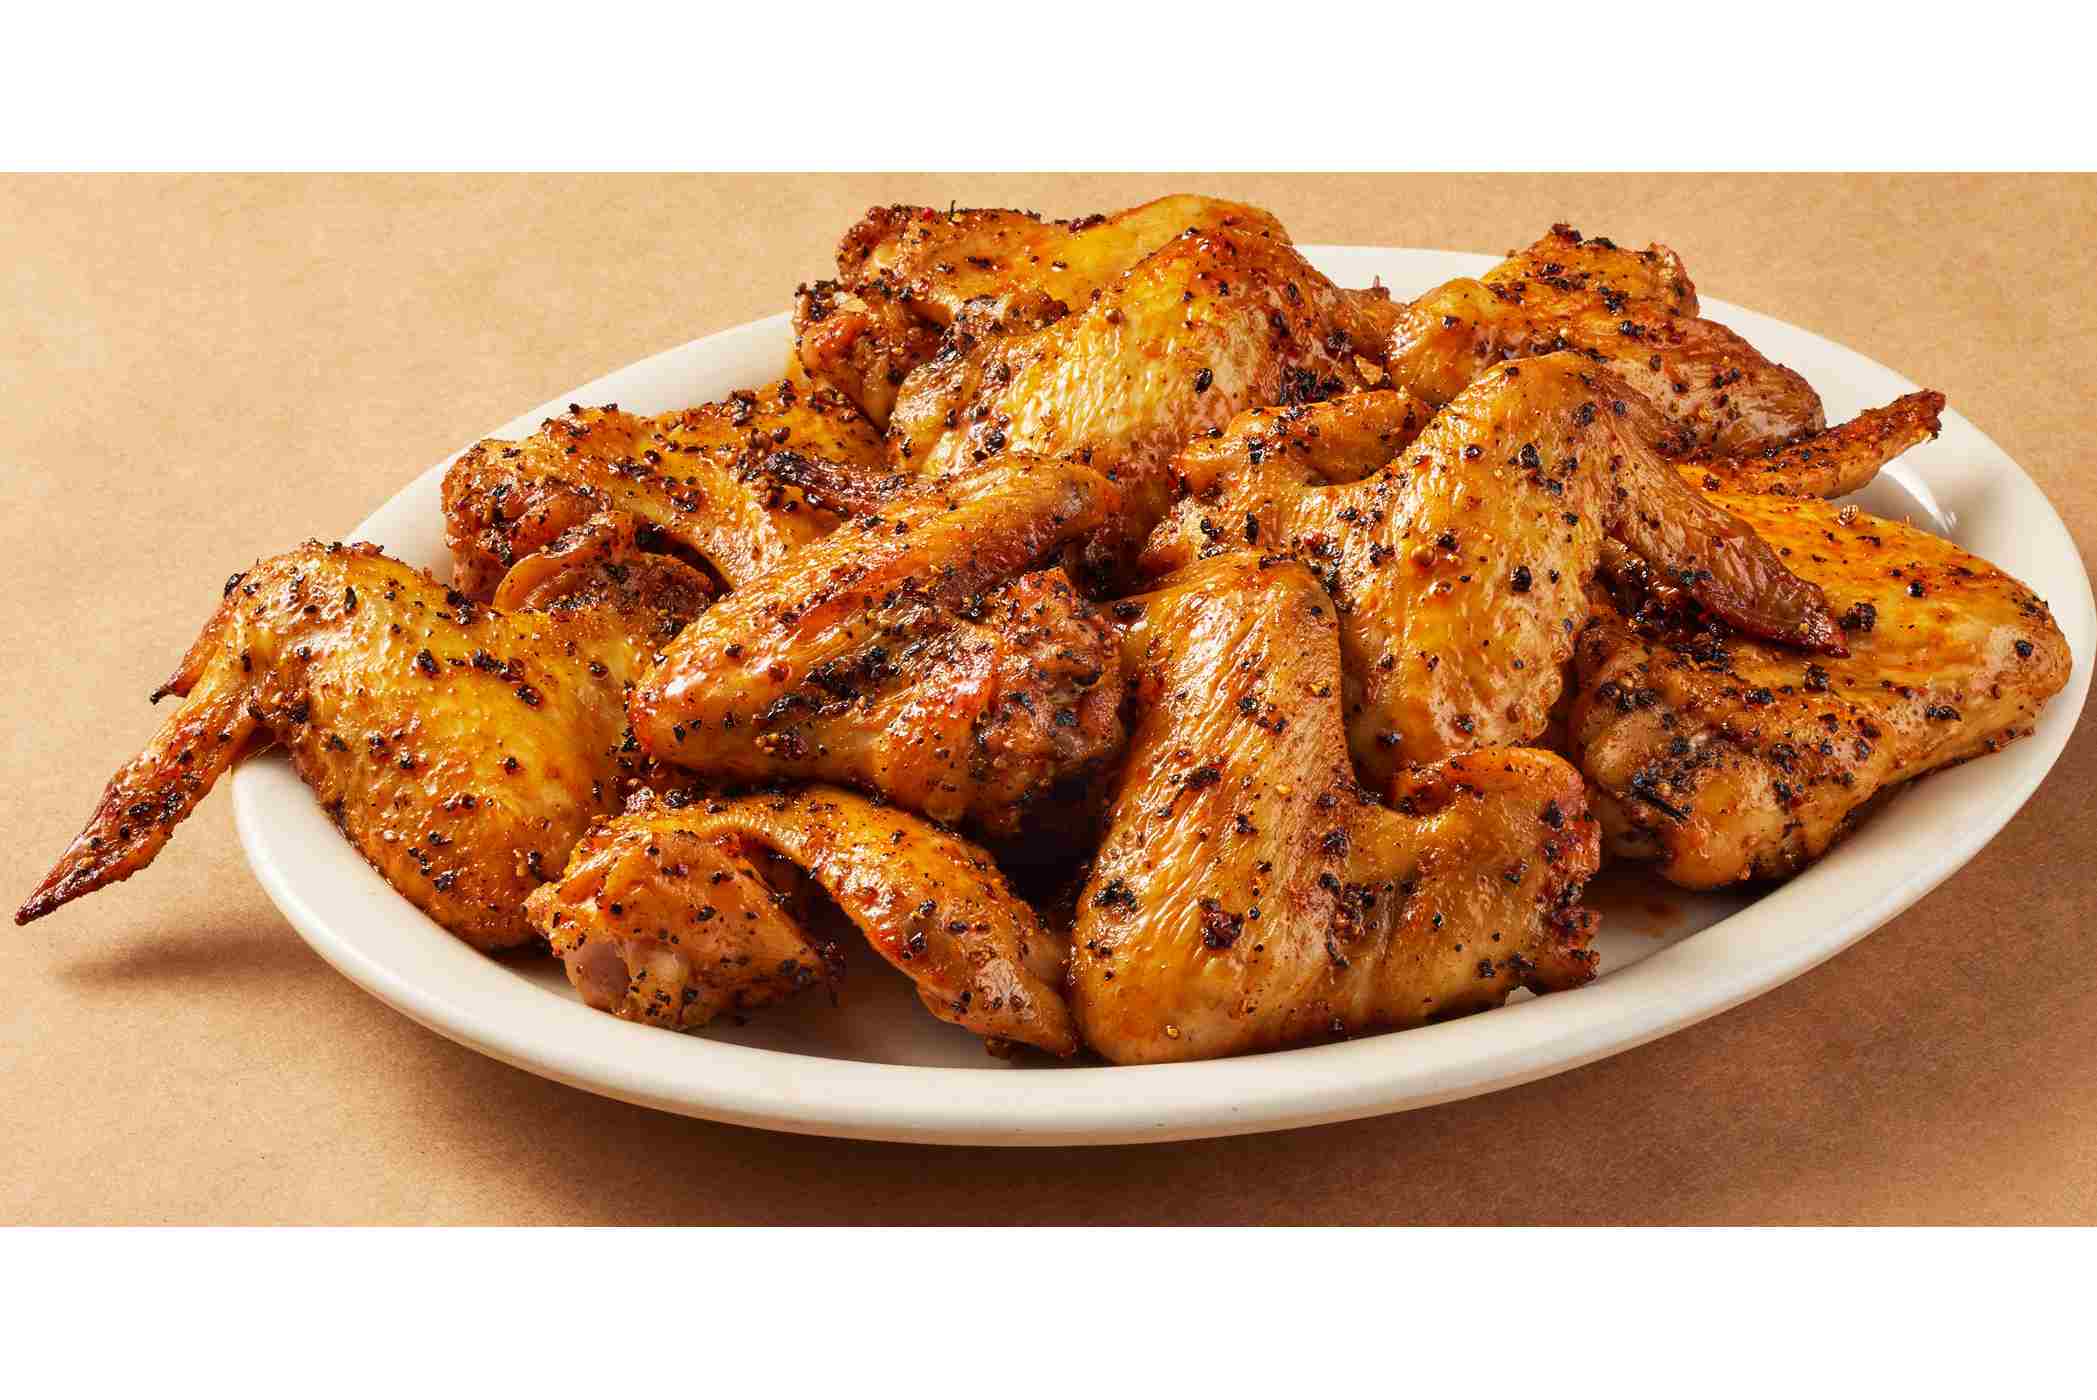 H-E-B Meat Market Marinated Whole Chicken Wings - Smoky BBQ - Texas-Size Pack; image 3 of 3